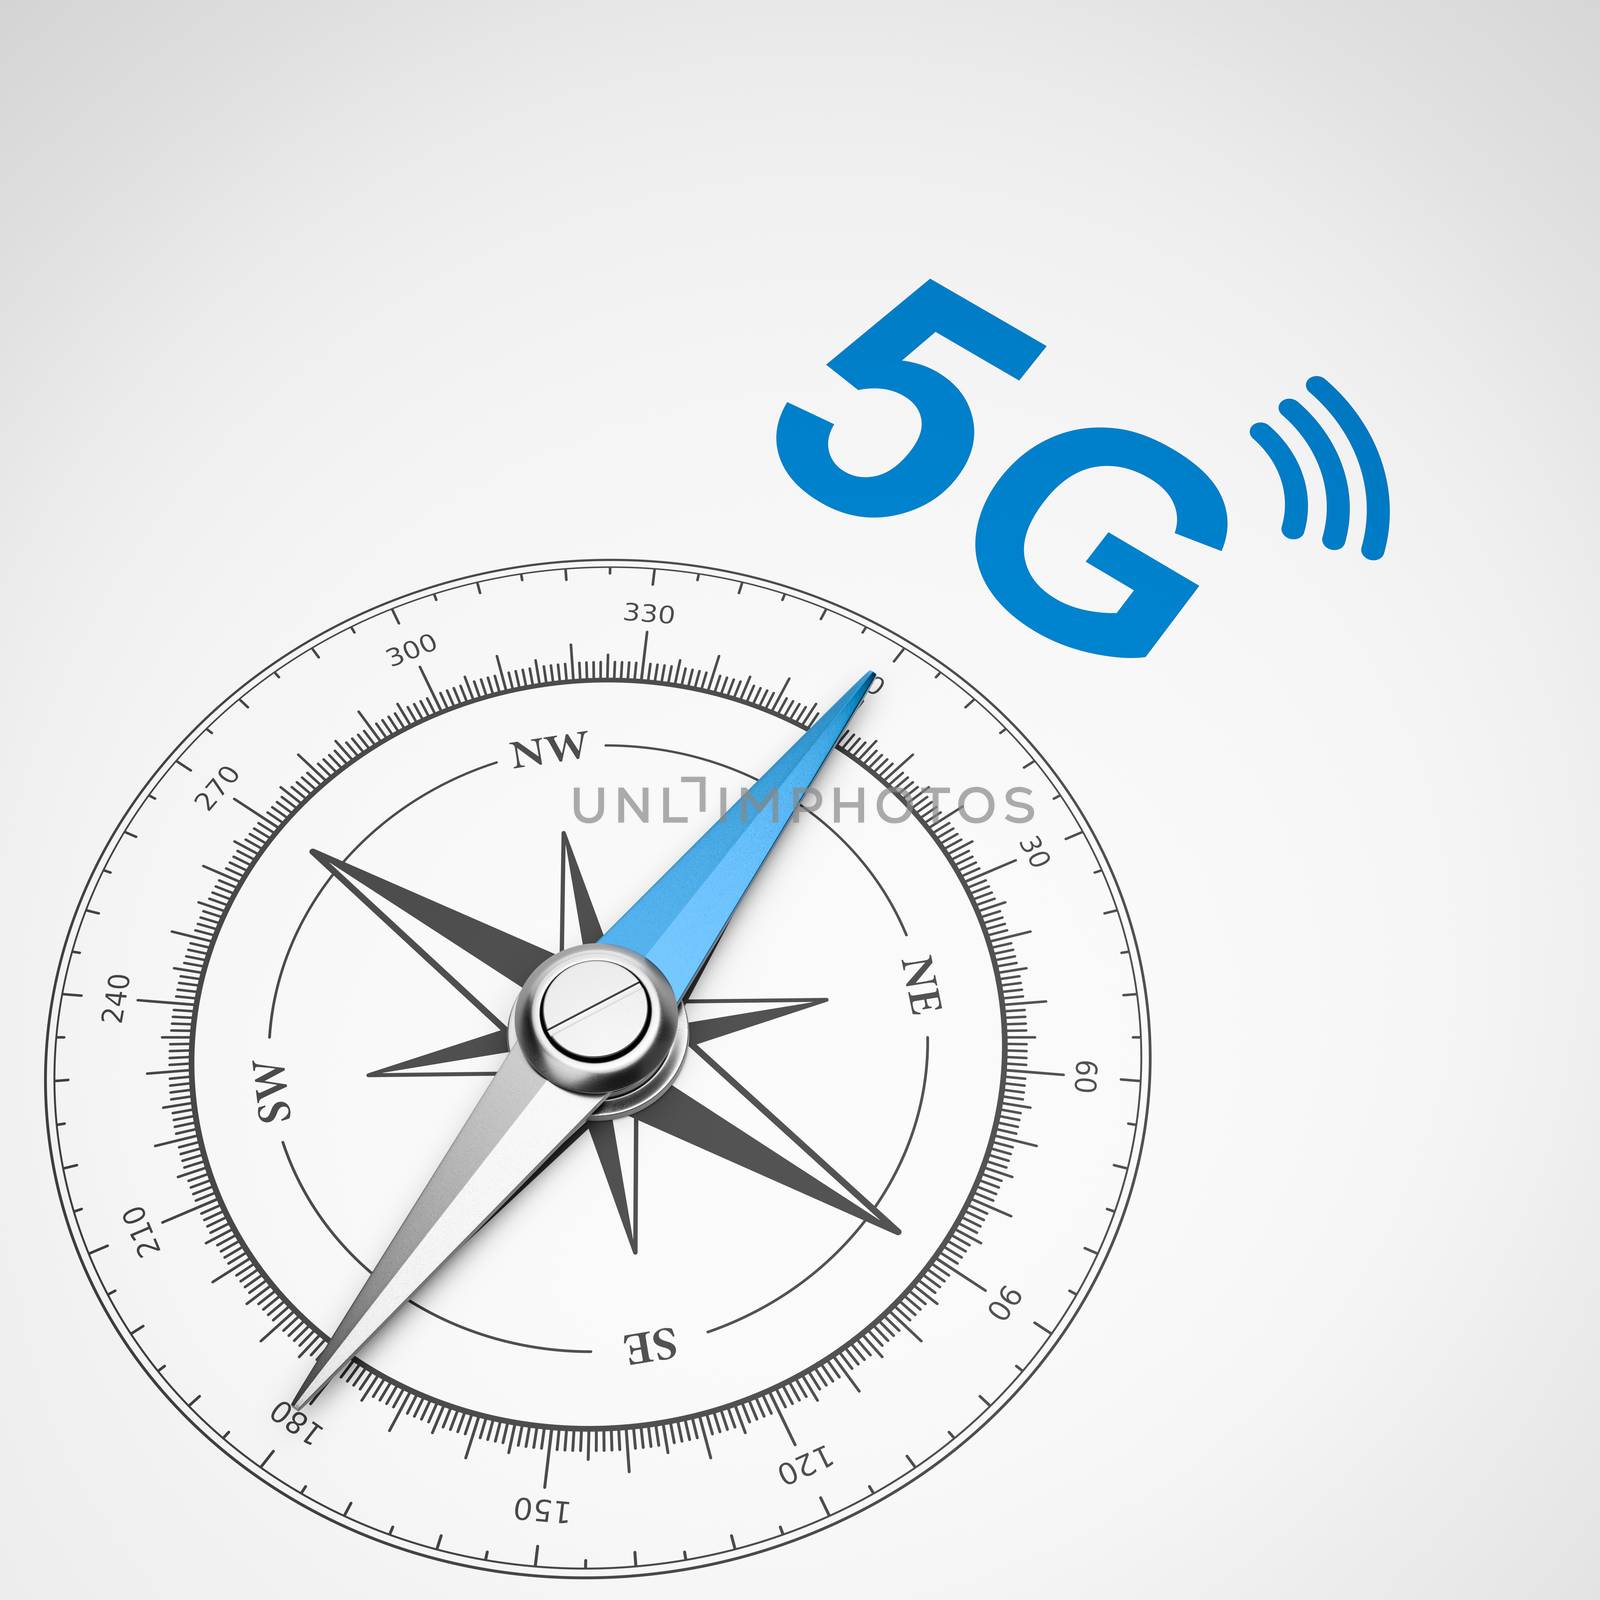 Compass on White Background, 5G Mobile Technology Concept by make